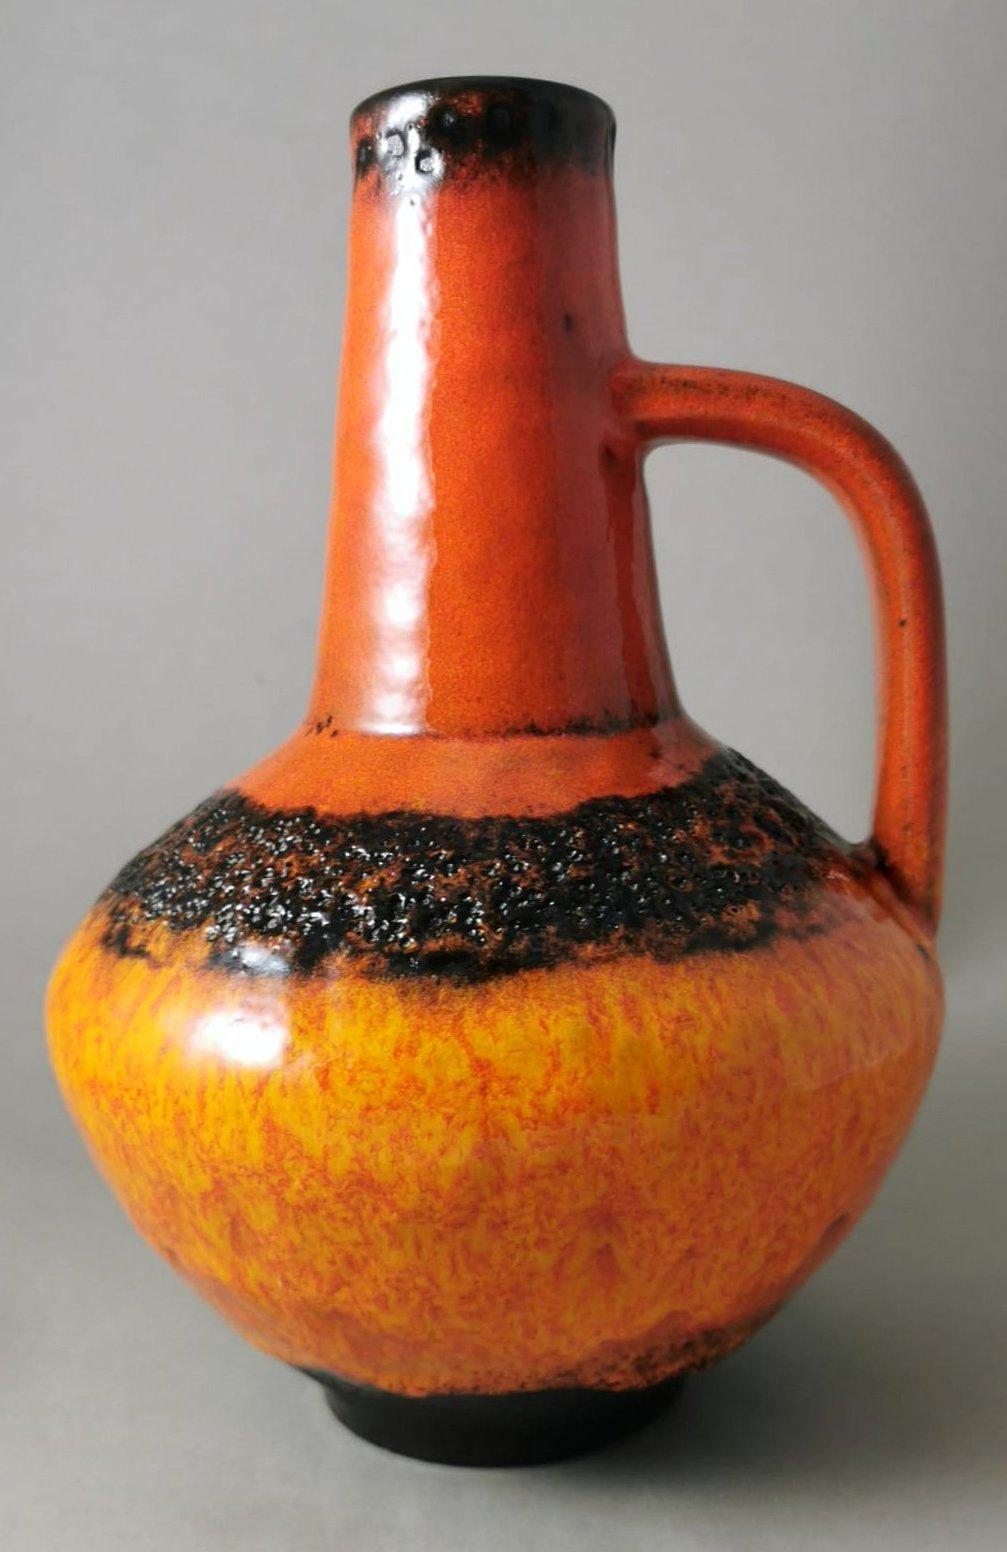 We kindly suggest you read the whole description, as with it we try to give you detailed technical and historical information to guarantee the authenticity of our objects.
Peculiar and original German ceramic jug colored with a beautiful shade of